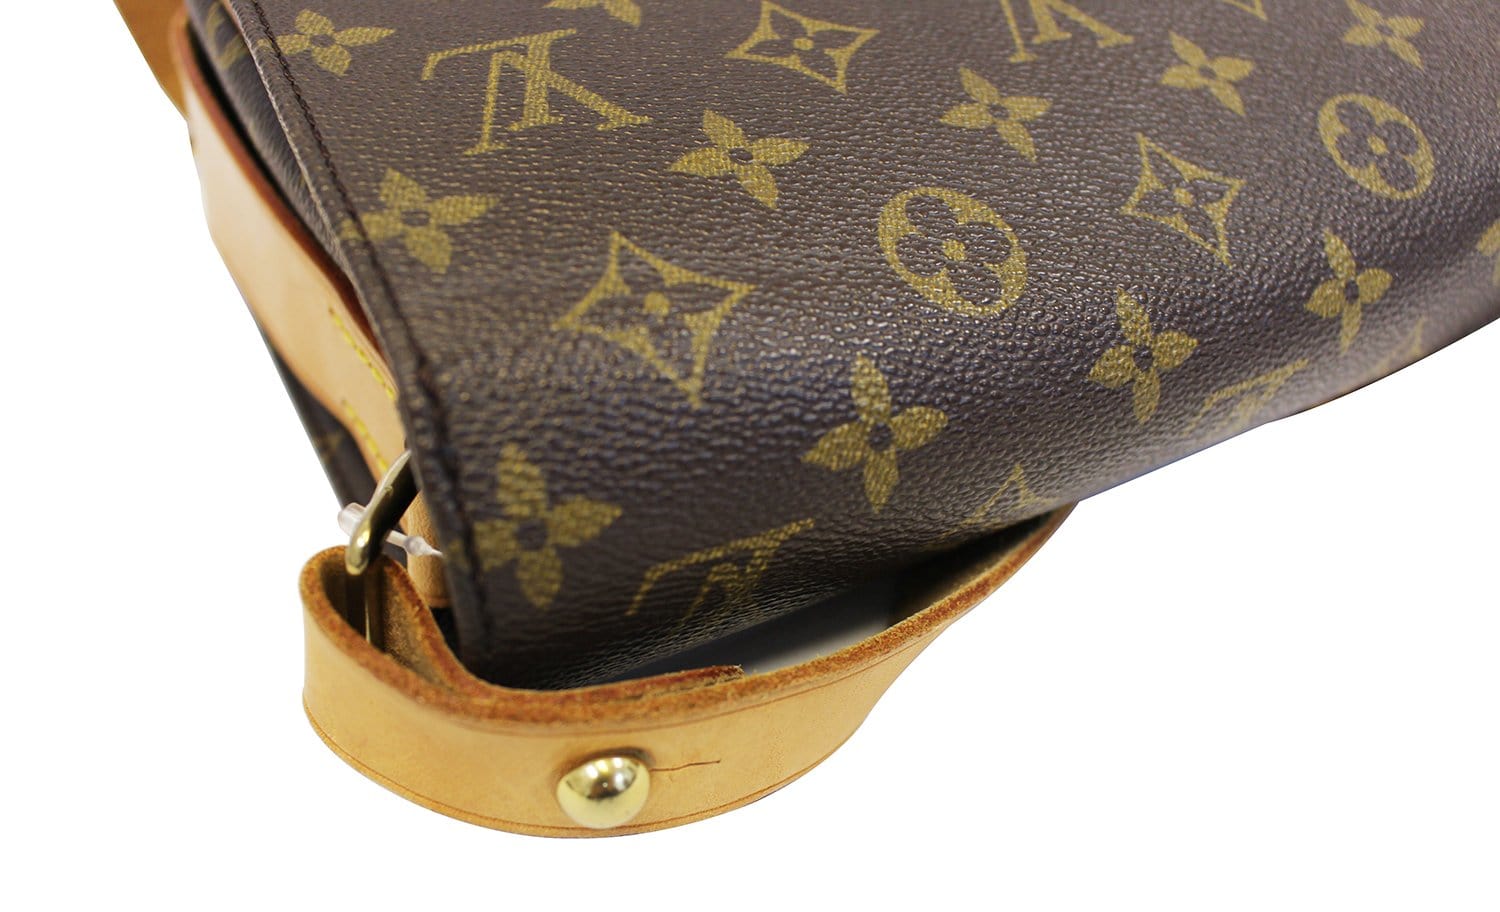 Cartouchière leather crossbody bag Louis Vuitton Brown in Leather - 32742719